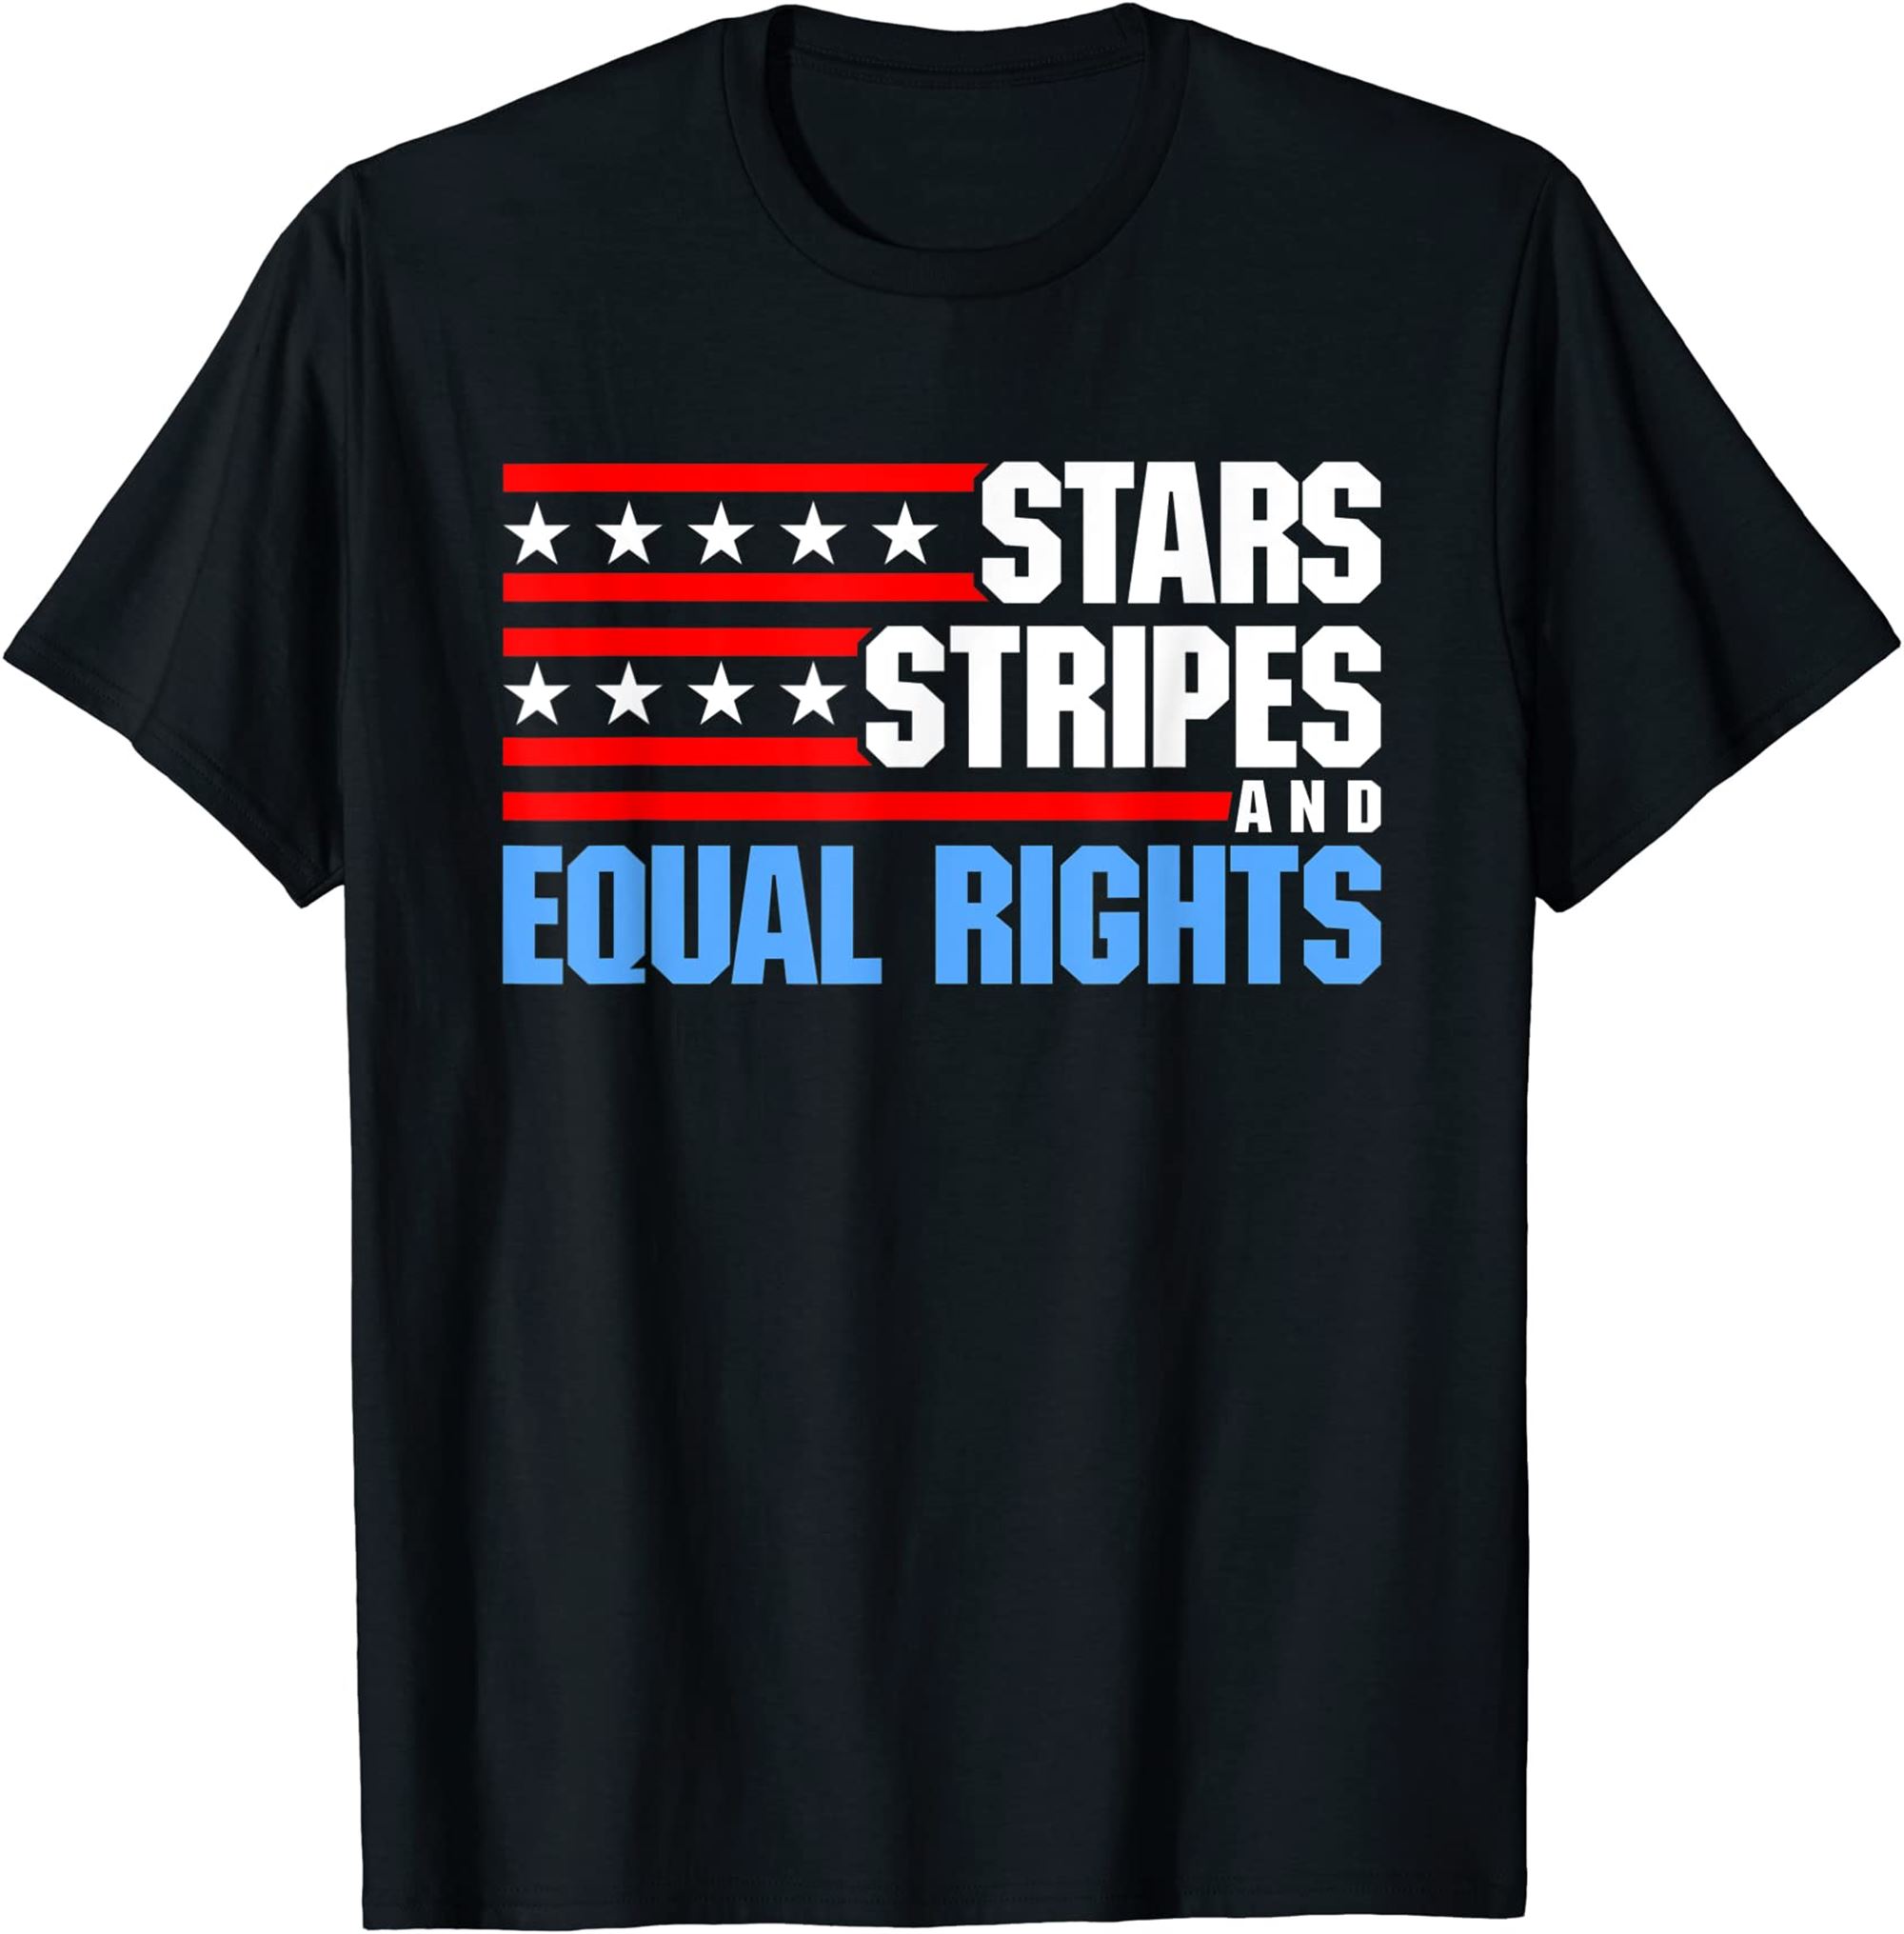 Stars Stripes And Equal Rights Patriotic 4th Of July Usa T-shirt Full Size Up To 5xl